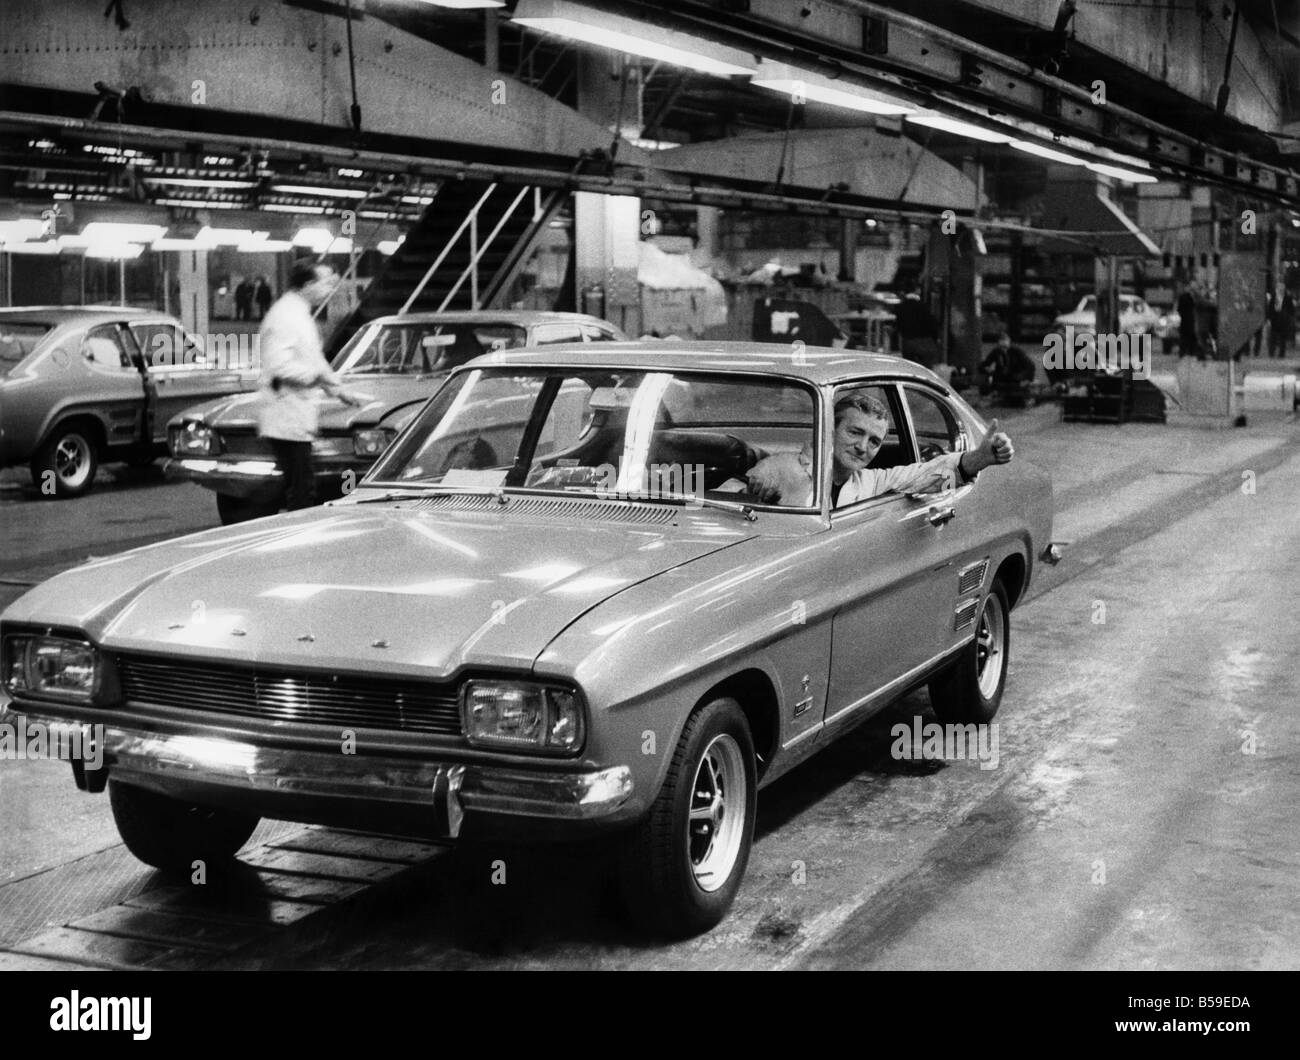 A Ford Capri rolls of the production line at the Halewood motor plant in Liverpool. &#13;&#10;March 1969 &#13;&#10;P005440 Stock Photo